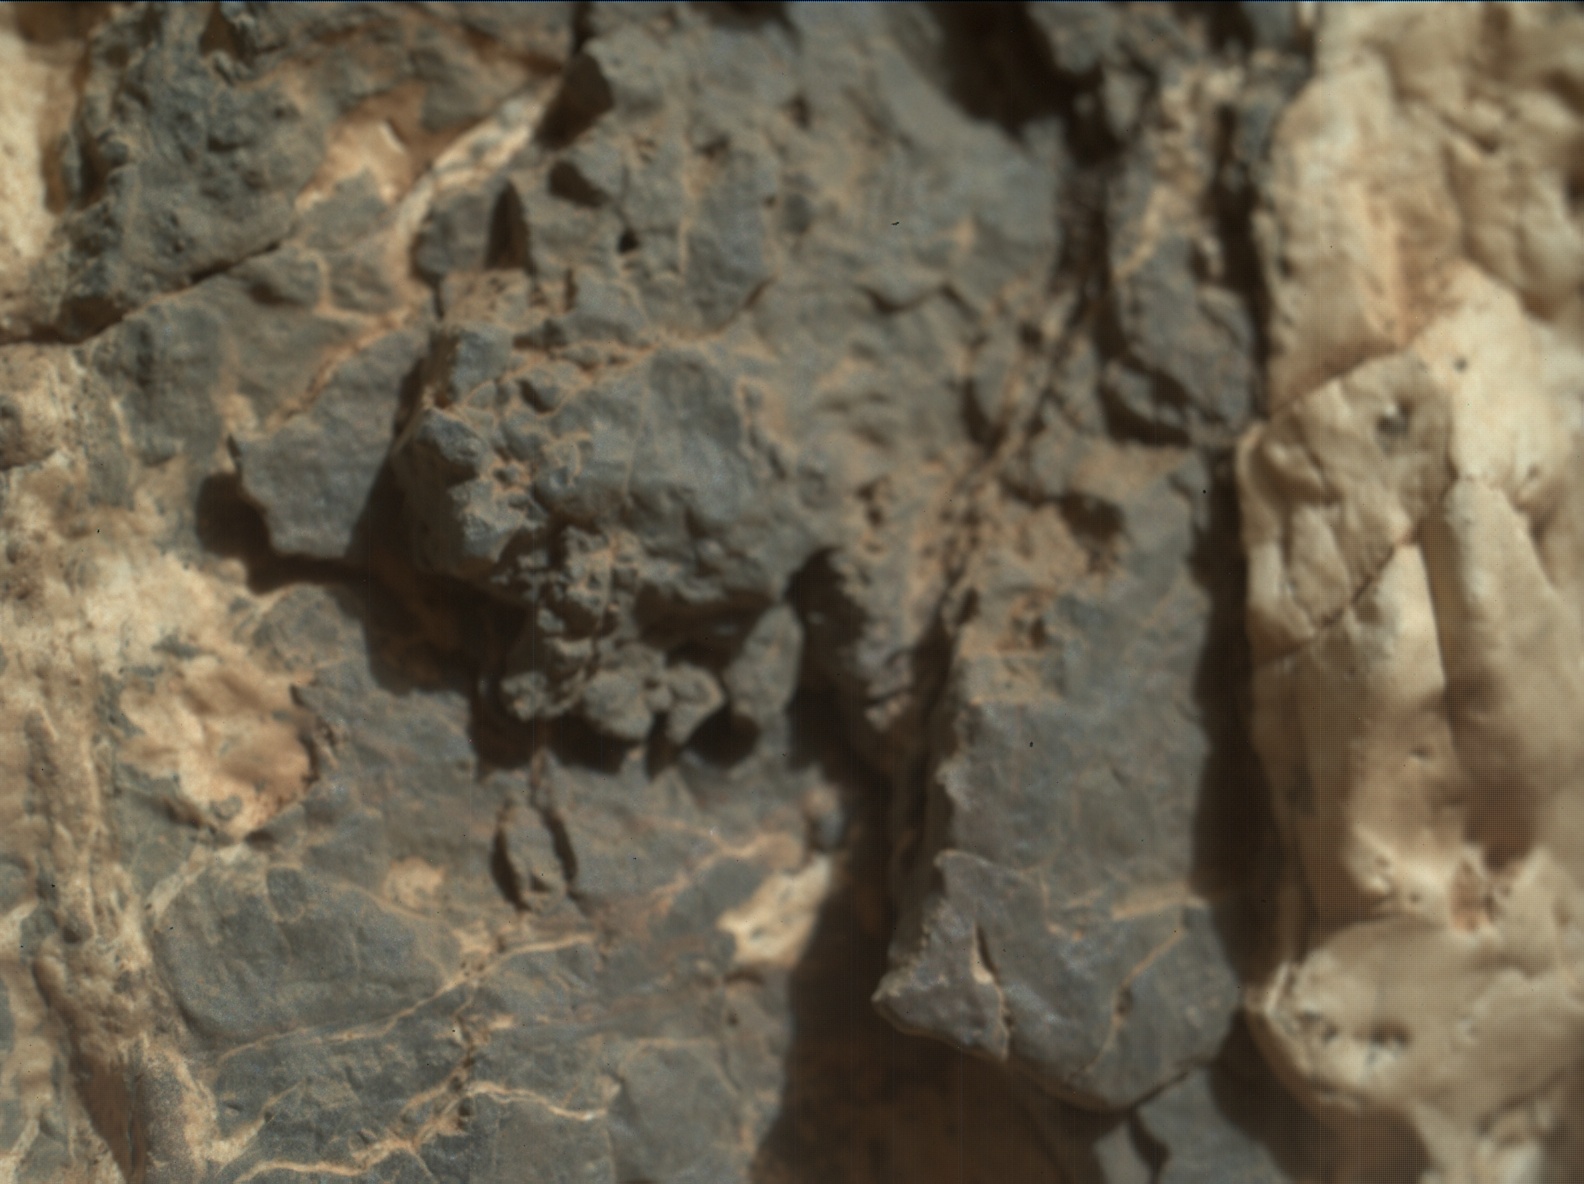 Nasa's Mars rover Curiosity acquired this image using its Mars Hand Lens Imager (MAHLI) on Sol 935